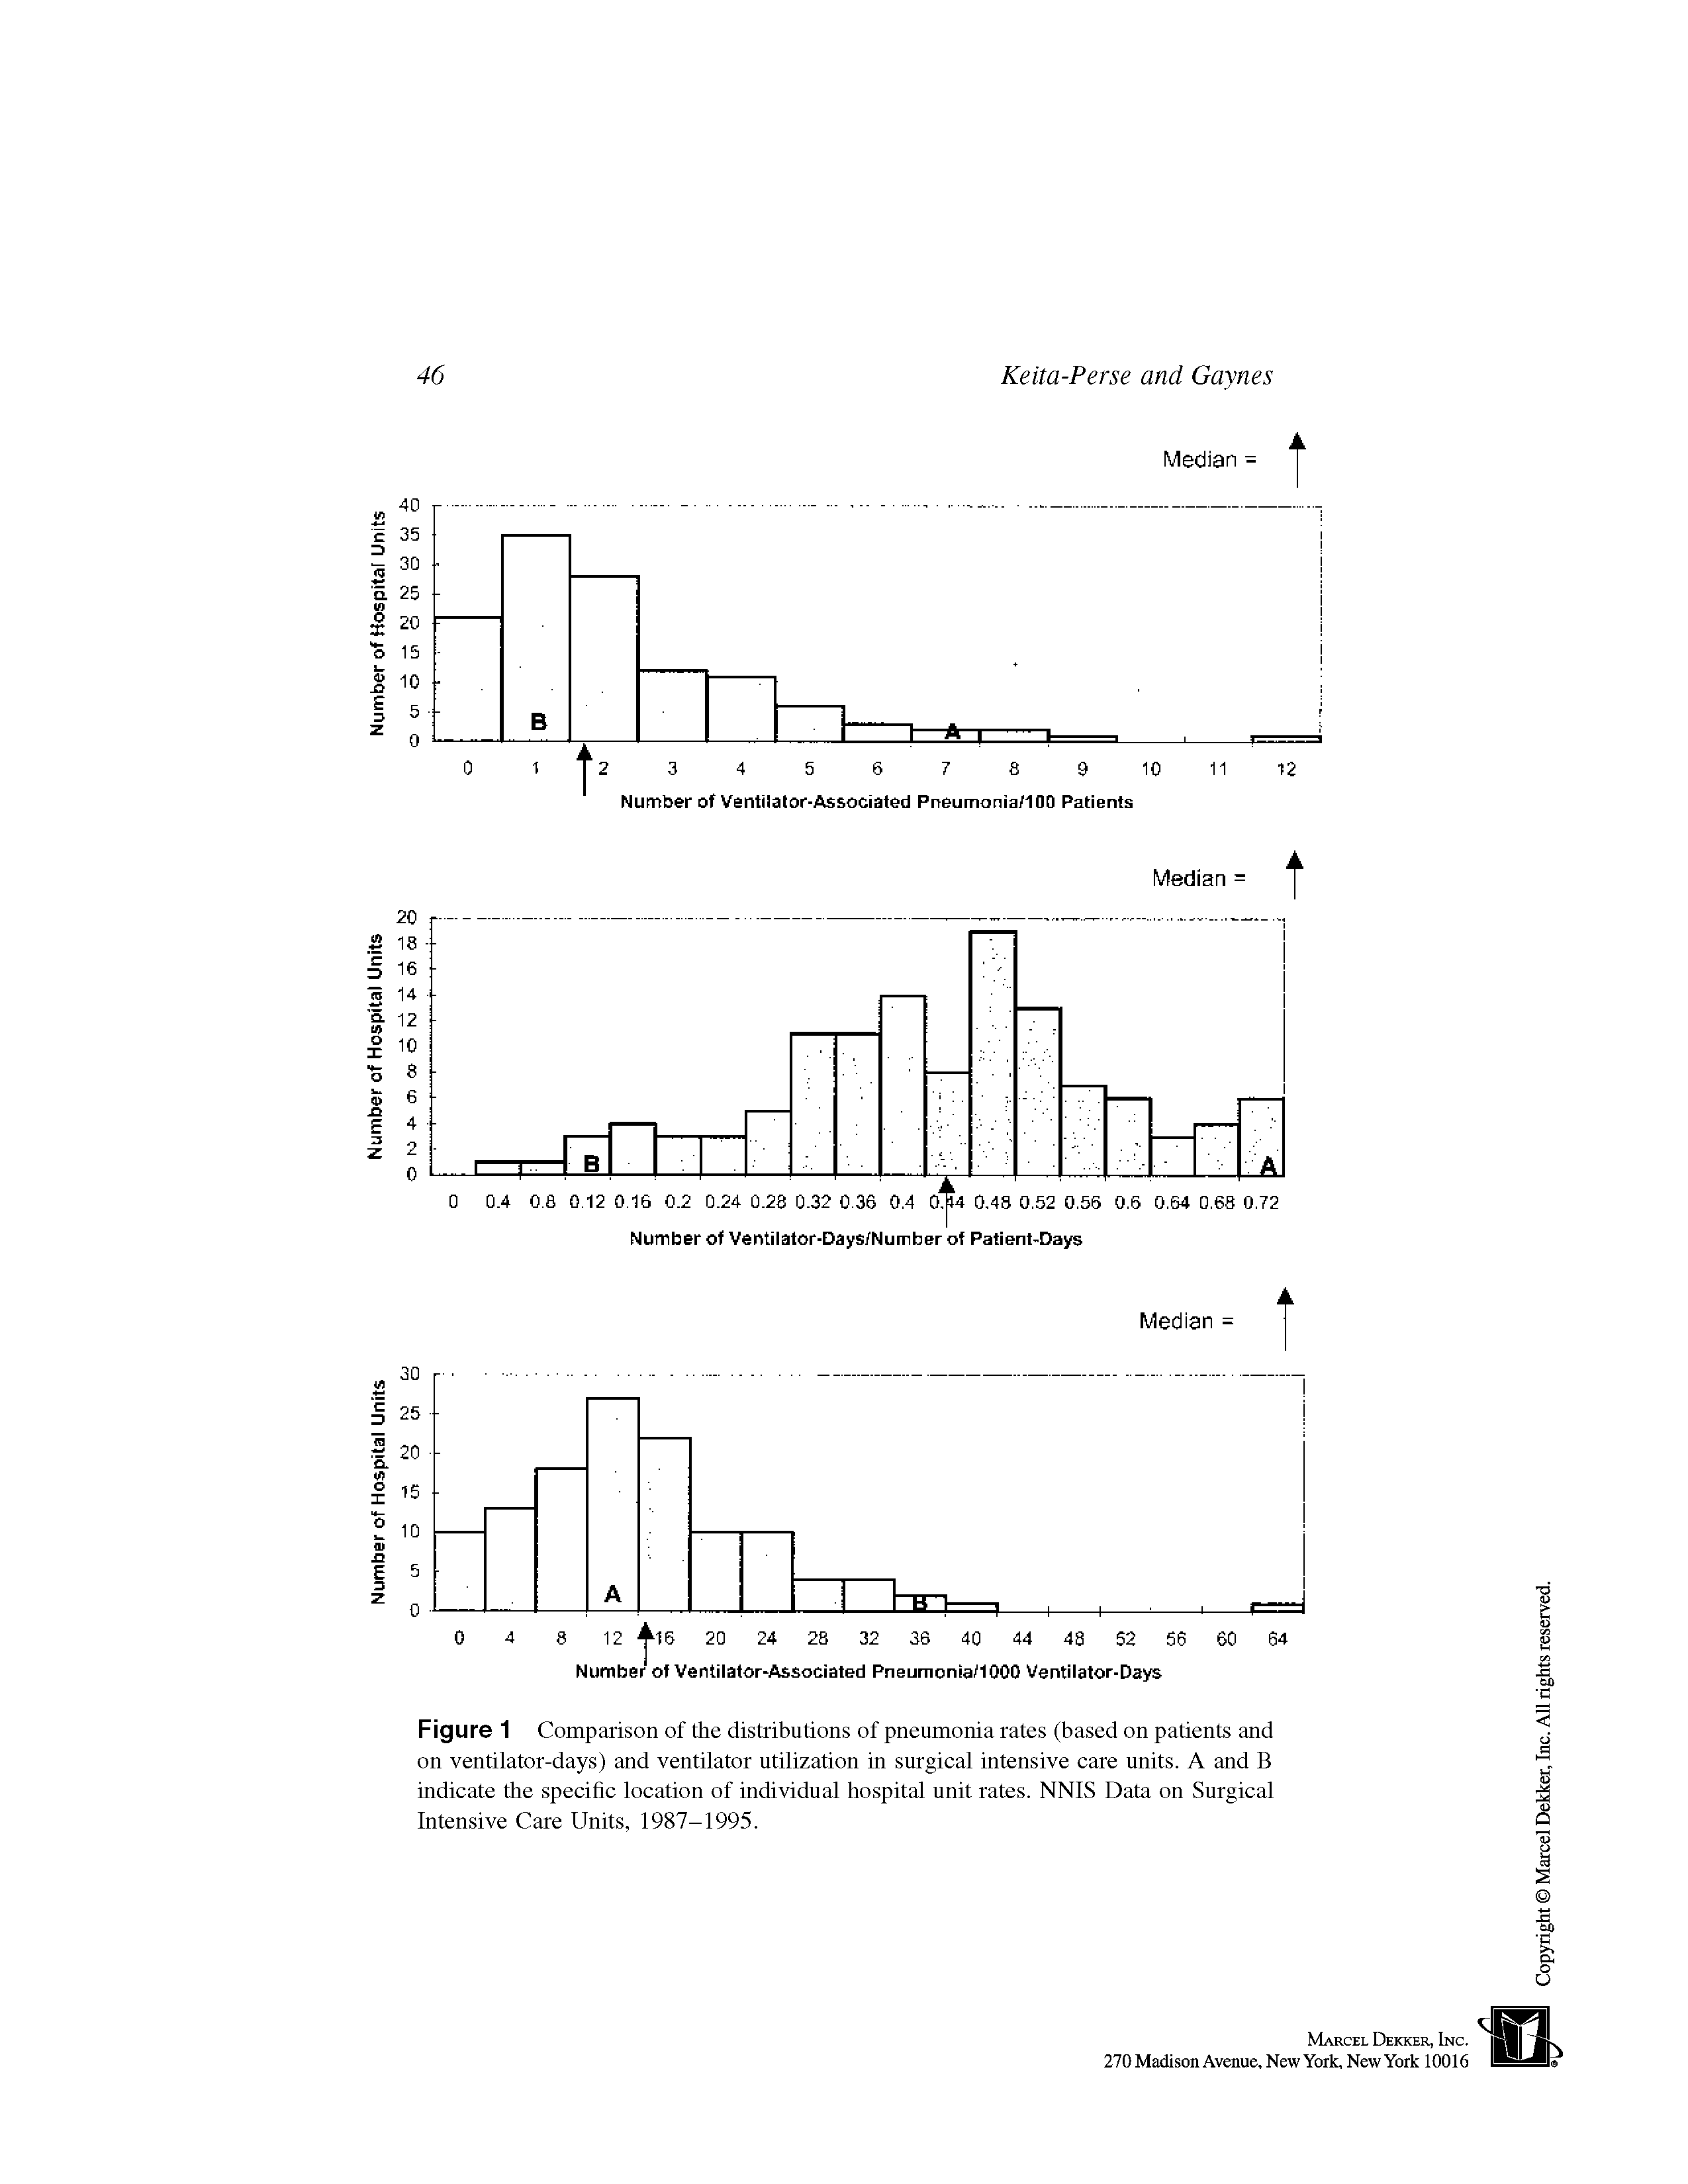 Figure 1 Comparison of the distributions of pneumonia rates (based on patients and on ventilator-days) and ventilator utilization in surgical intensive care units. A and B indicate the specific location of individual hospital unit rates. NNIS Data on Surgical Intensive Care Units, 1987-1995.